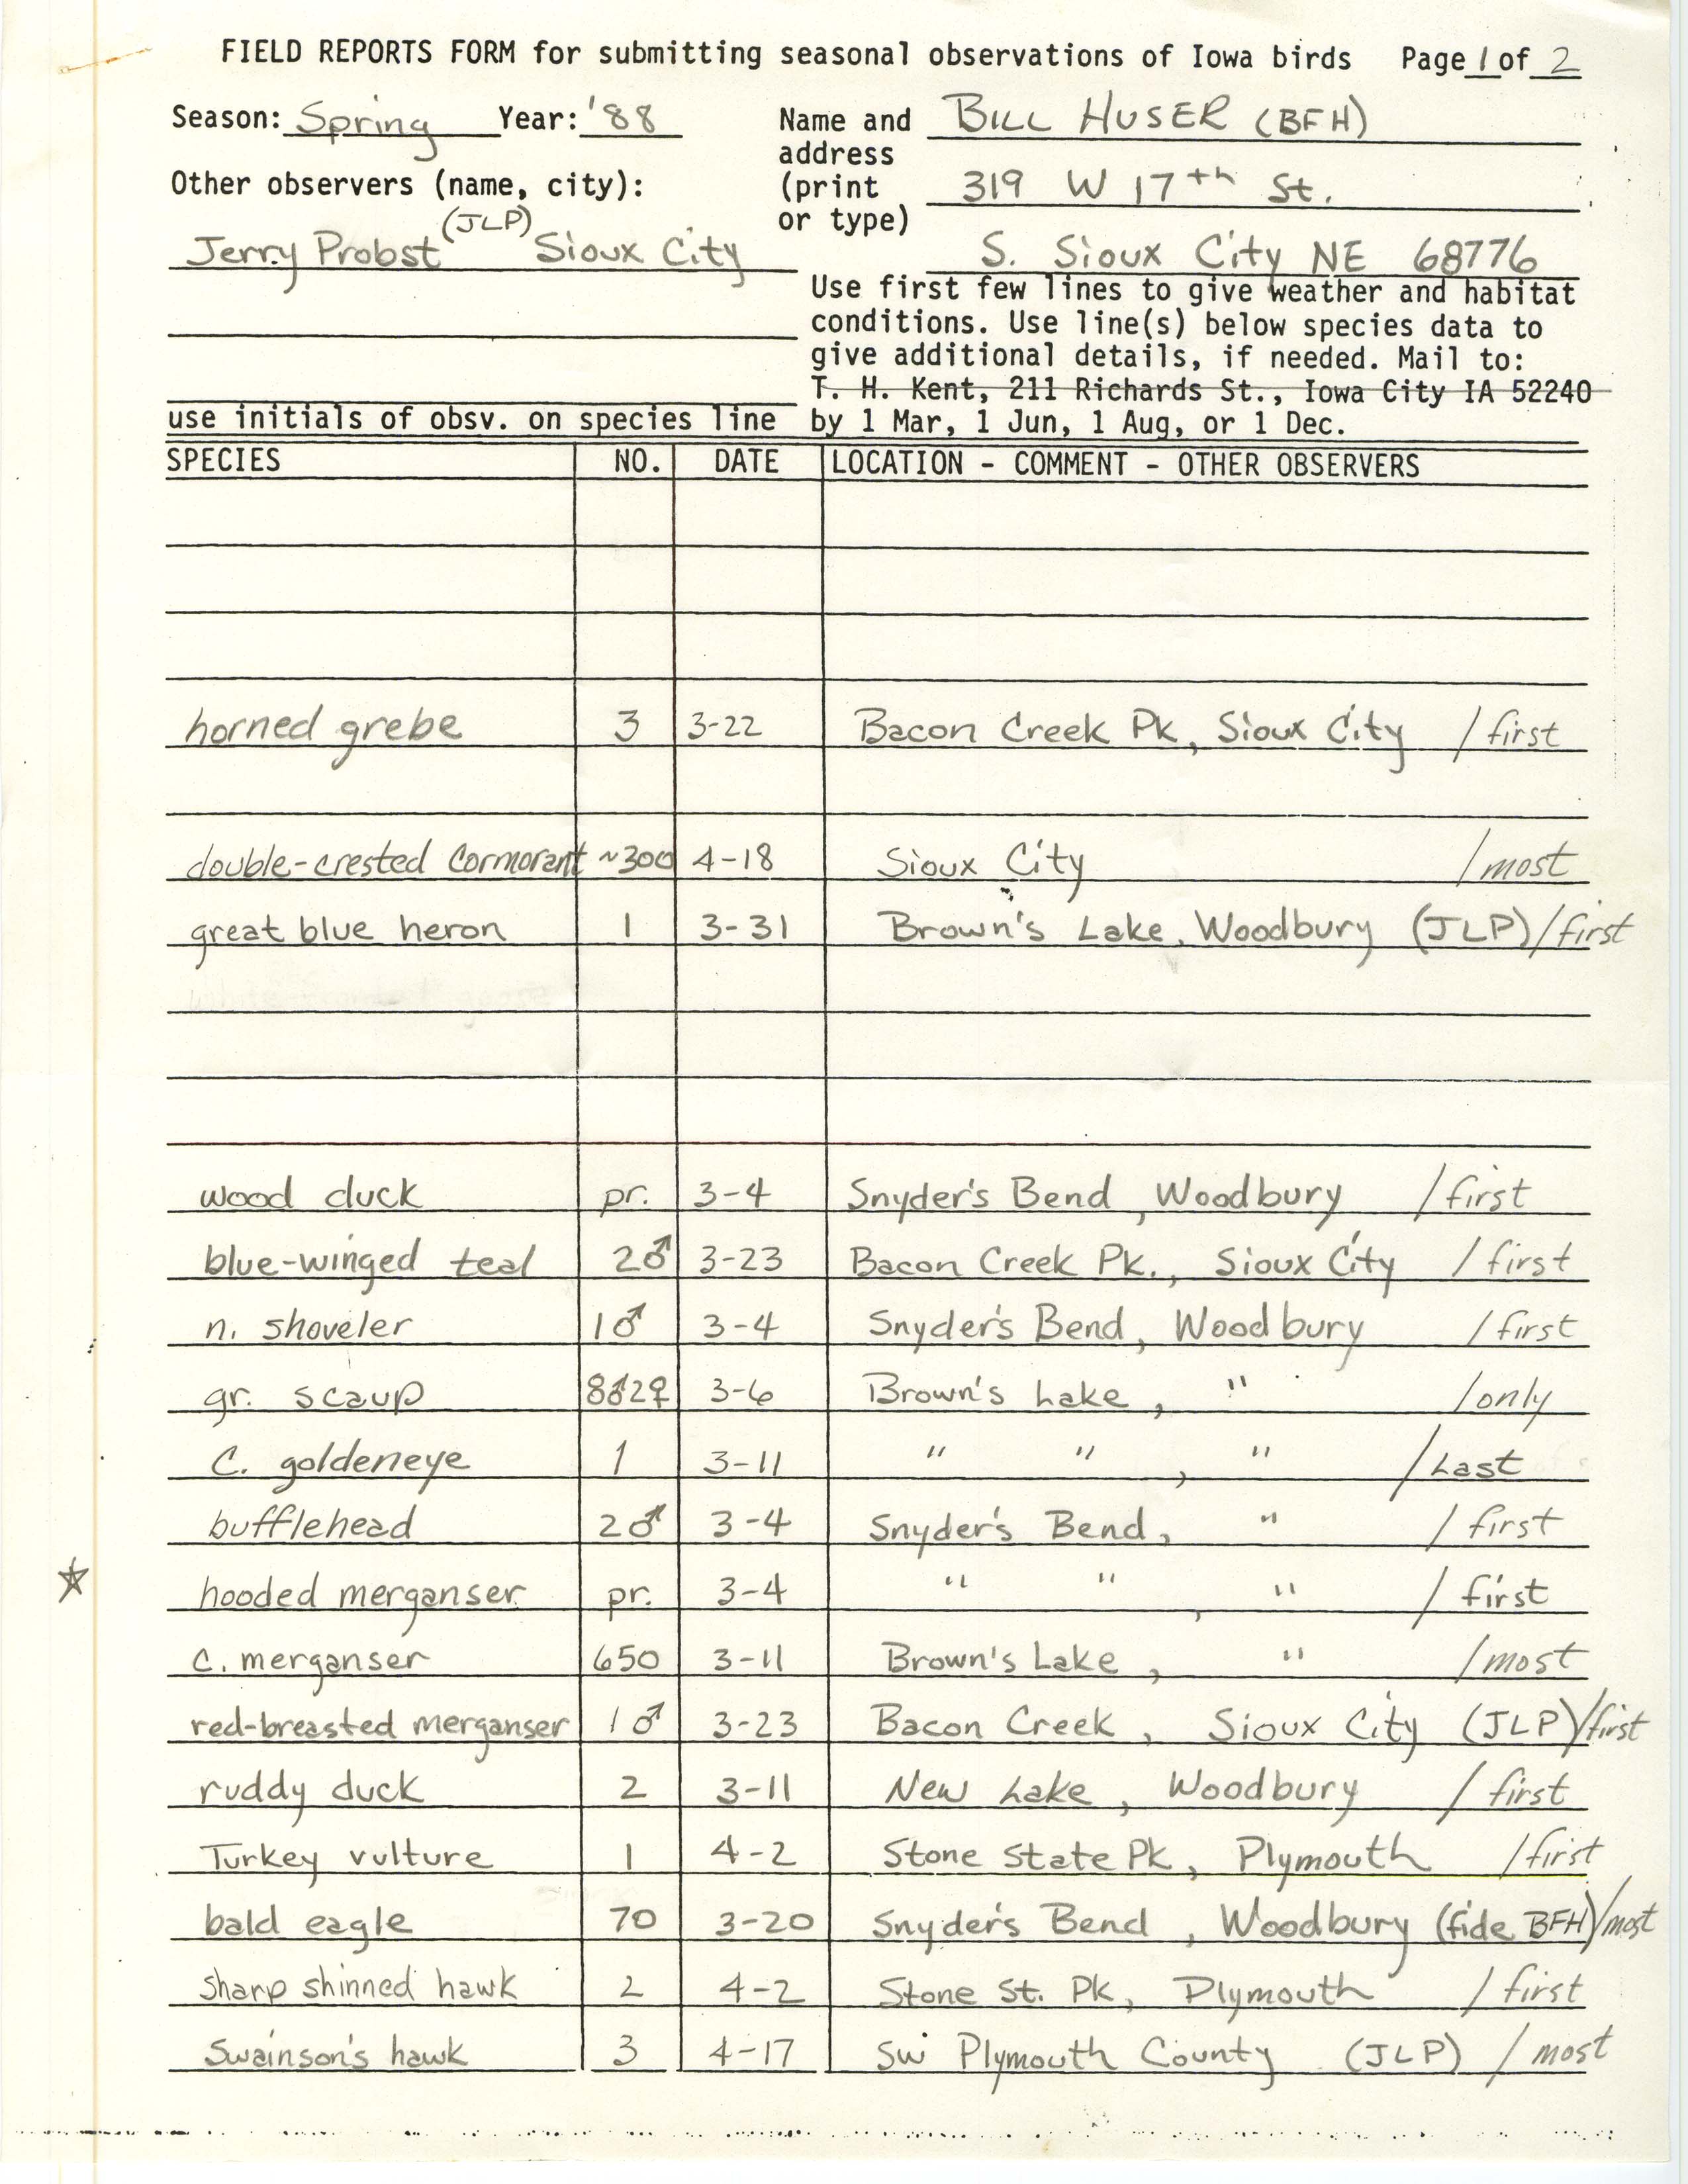 Field reports form for submitting seasonal observations of Iowa birds, Bill F. Huser, spring 1988